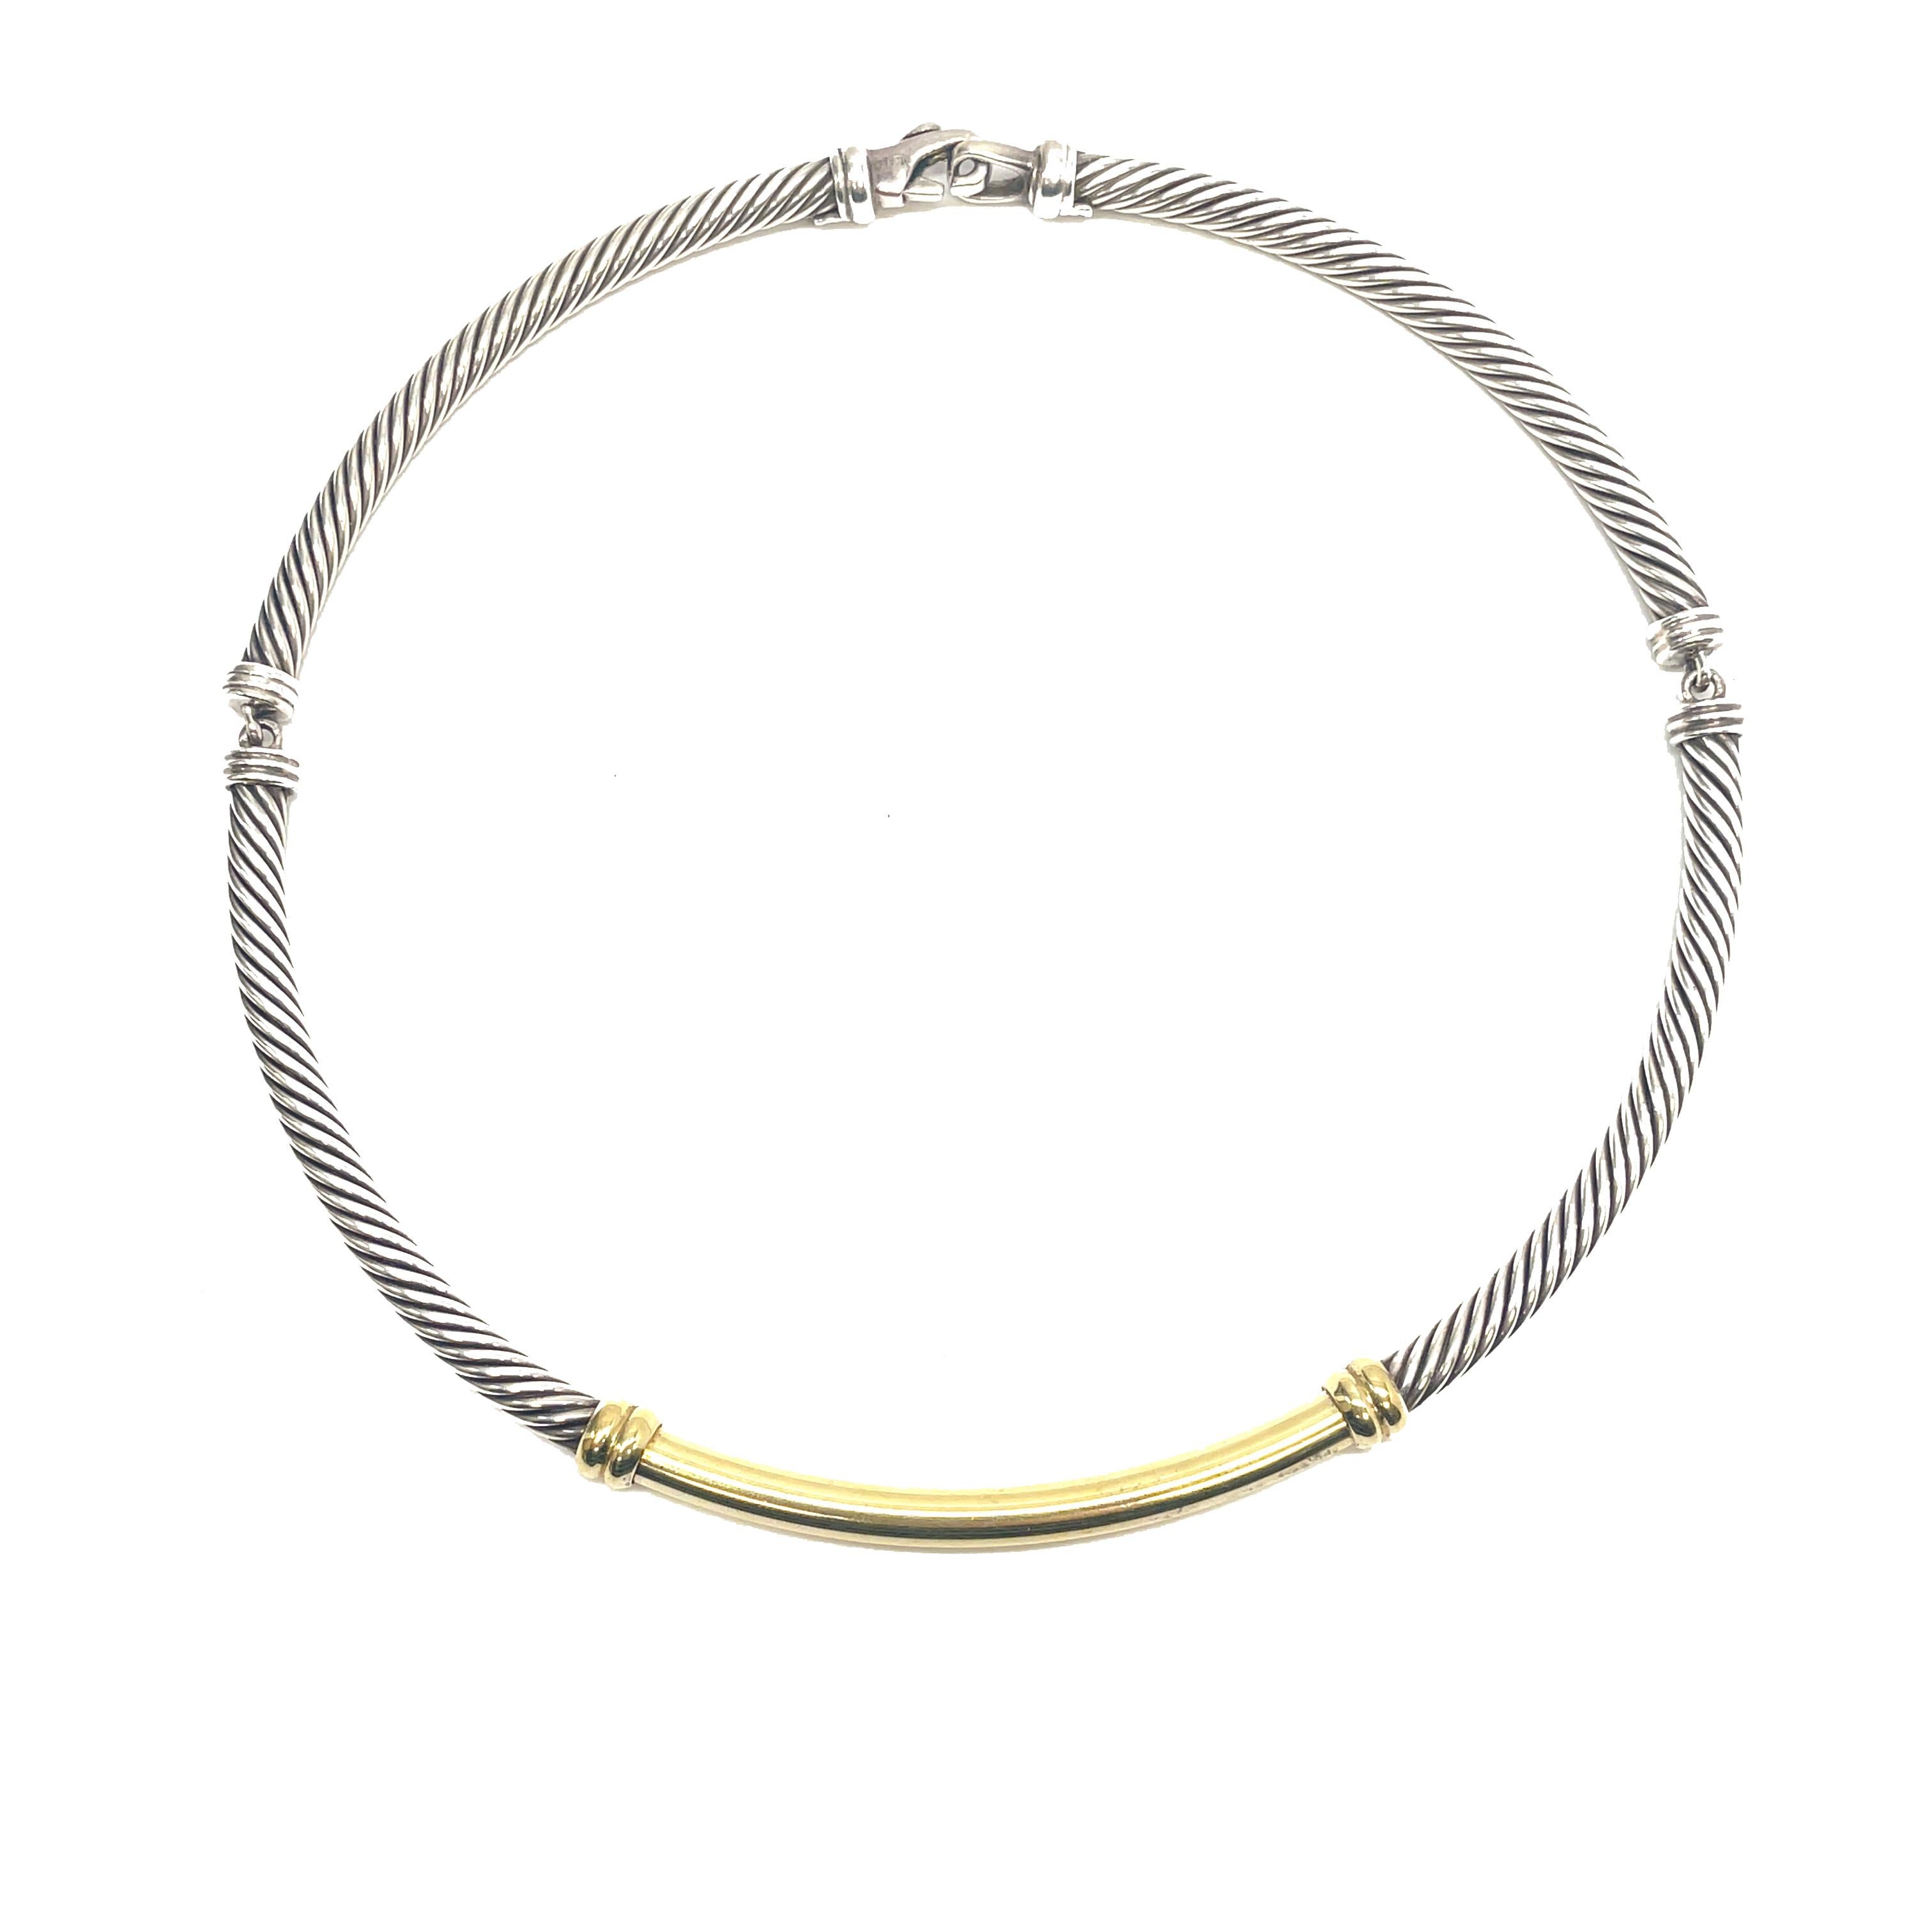 This is a gorgeous signed David Yurman vintage choker that is set in sterling silver that features a 14K yellow gold bar. 

This 90's Yurman necklace showcases a 7mm solid 14K yellow gold bar complimented by the iconic double twisted helix design